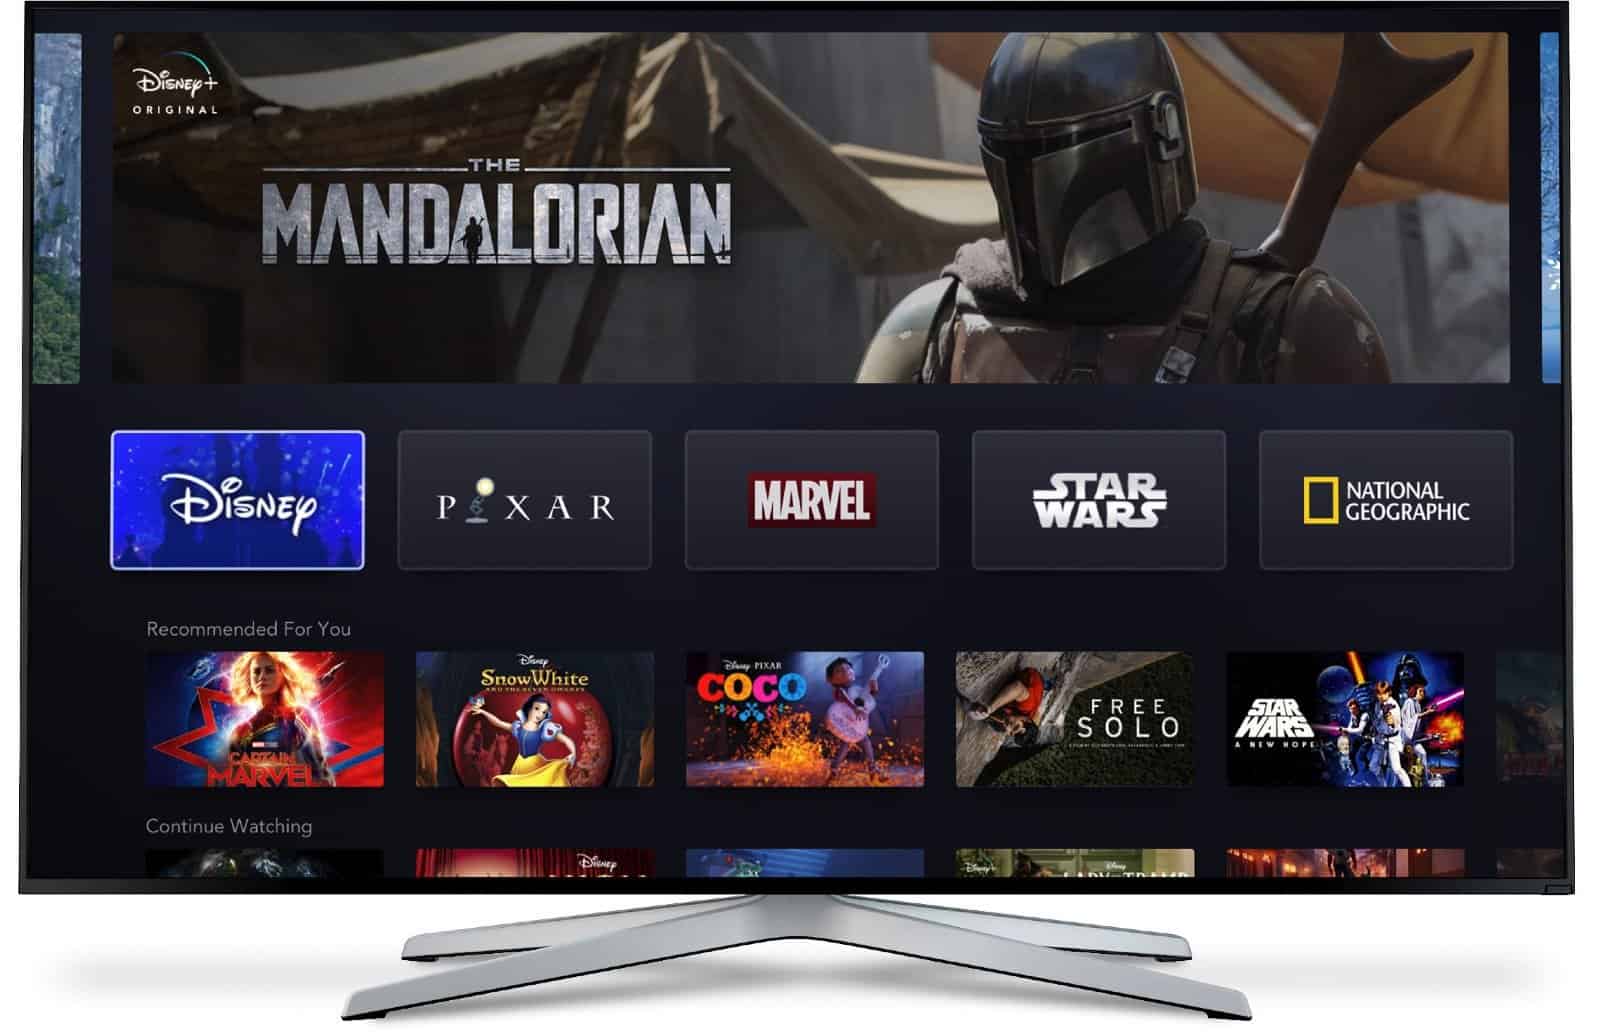 Disney+ will have a dedicated app for iOS, Apple TV